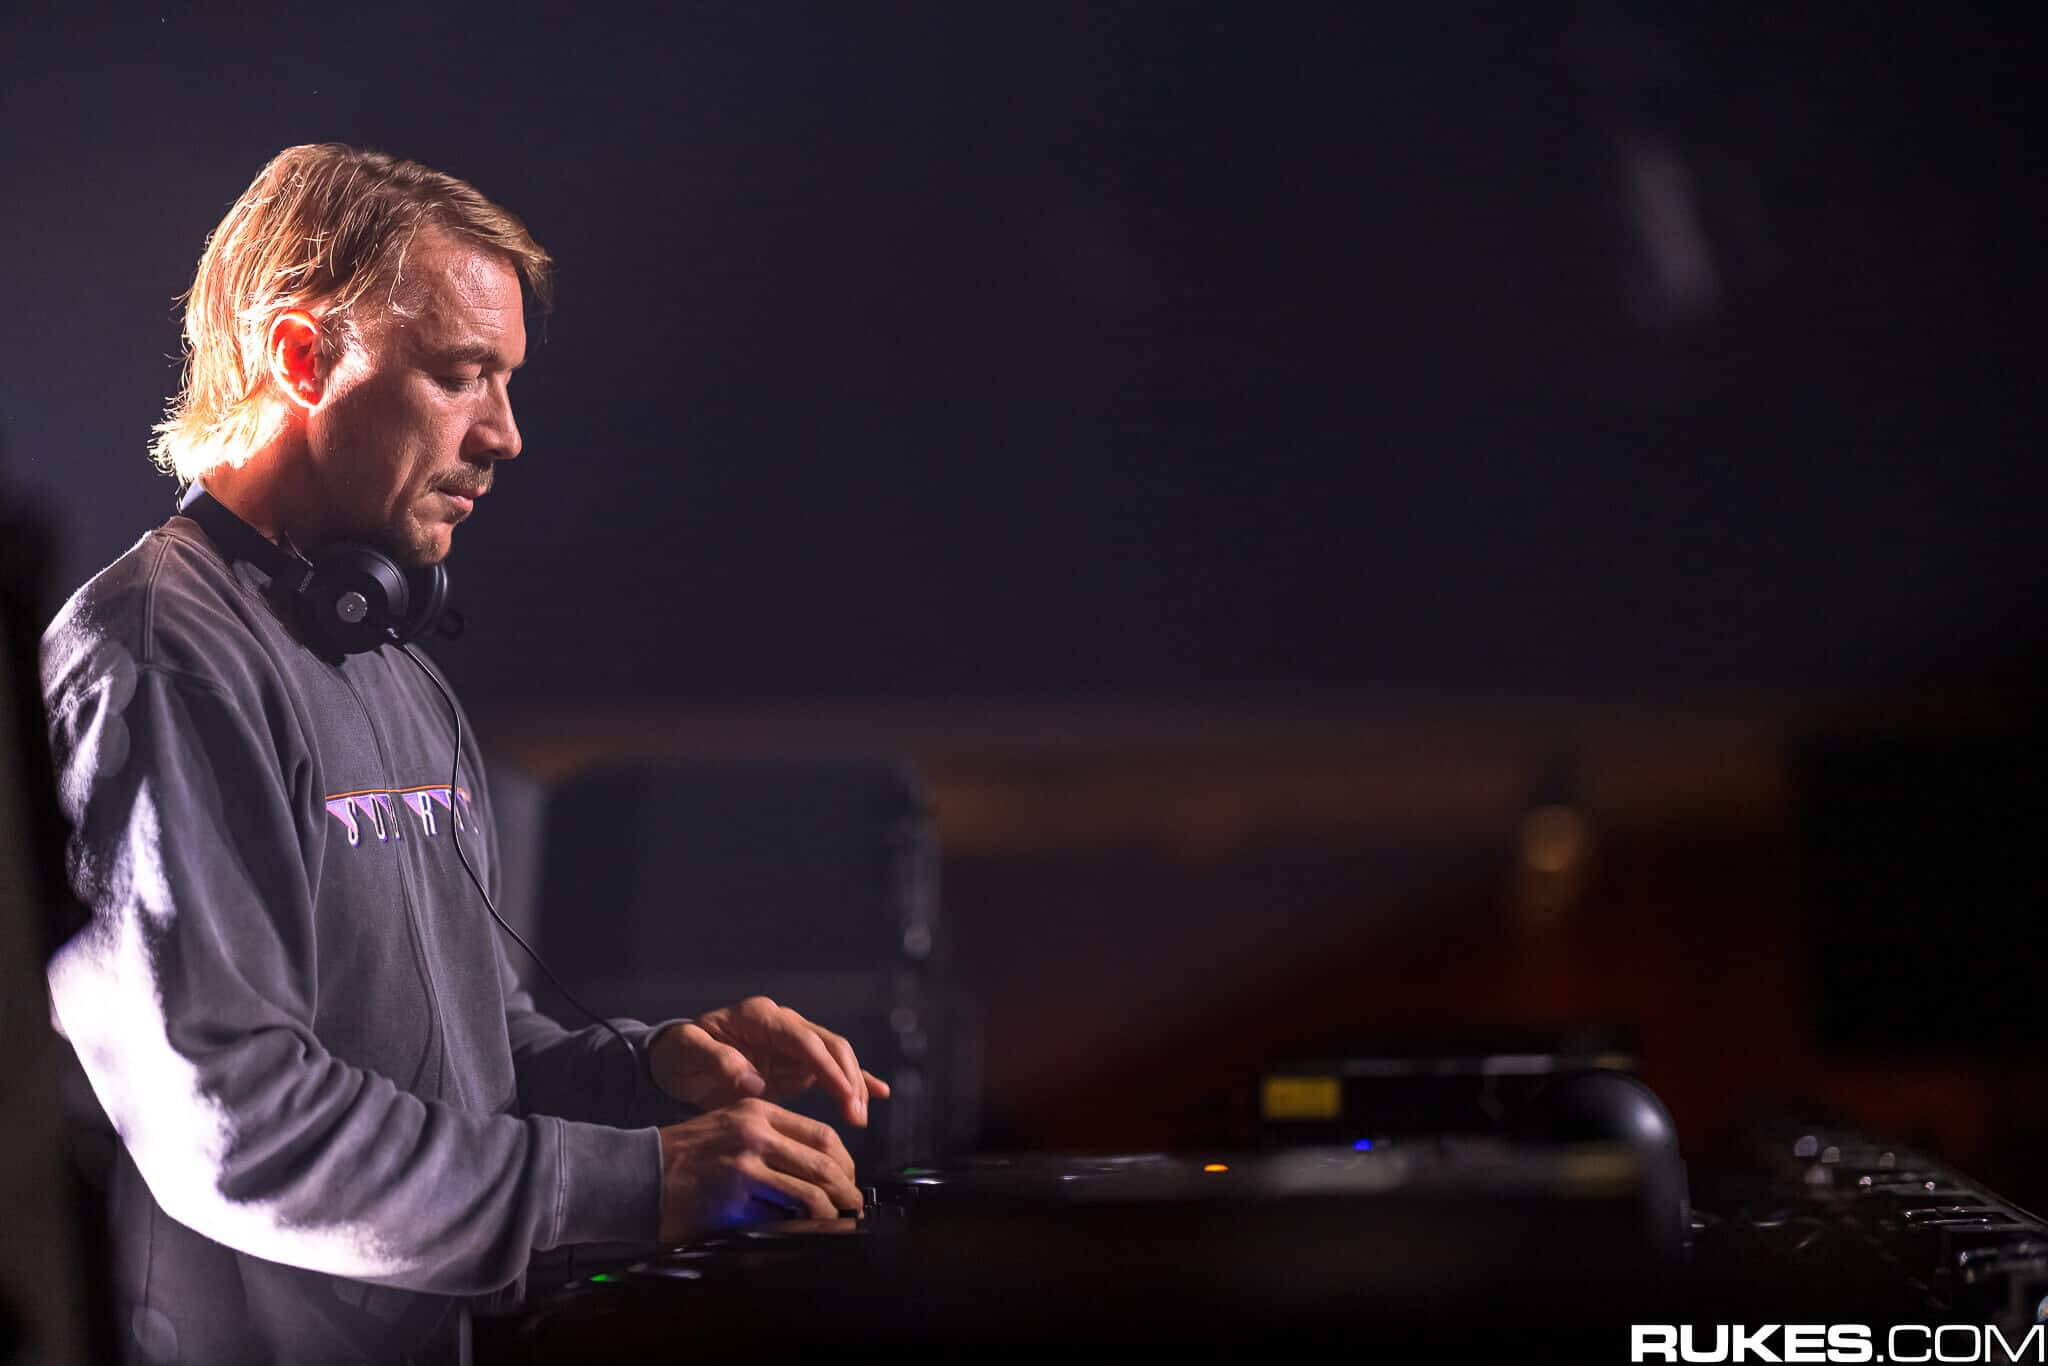 Chill with Diplo for a once-in-a-lifetime musical cruise to Antarctica